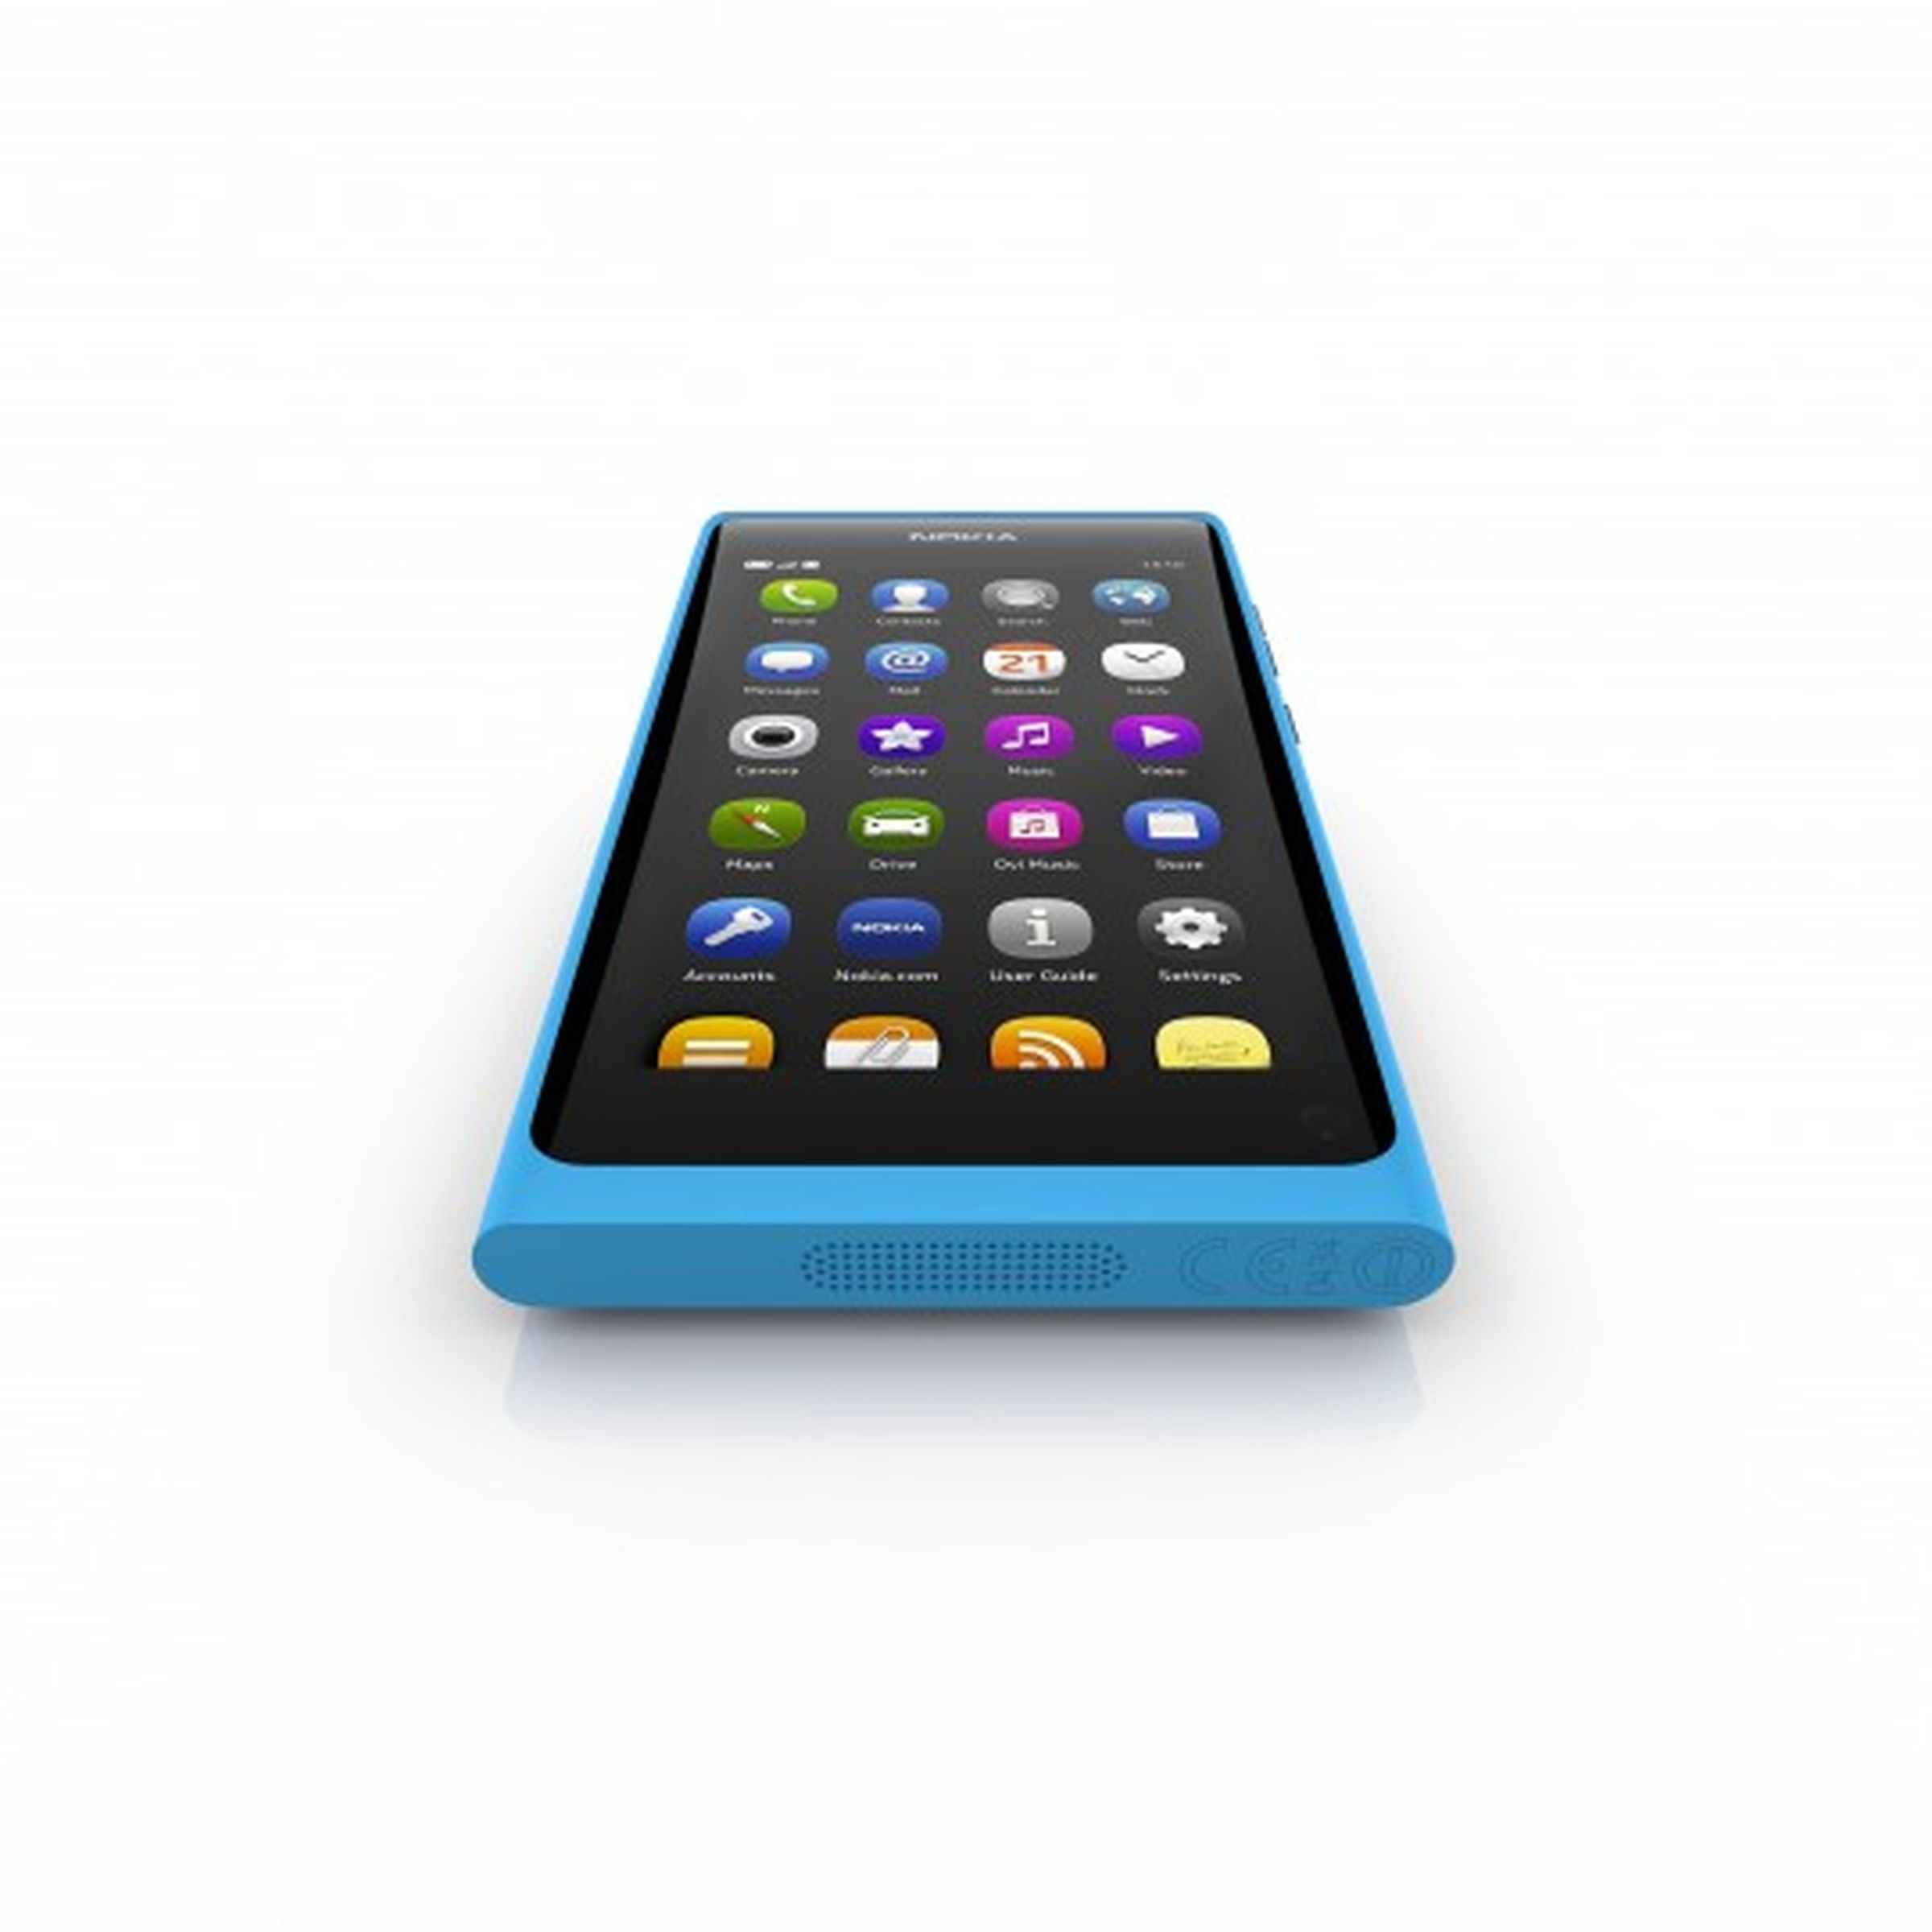 Nokia N9 officially announced: unibody design, buttonless ‘swipe’ UI, and the lost promise of MeeGo